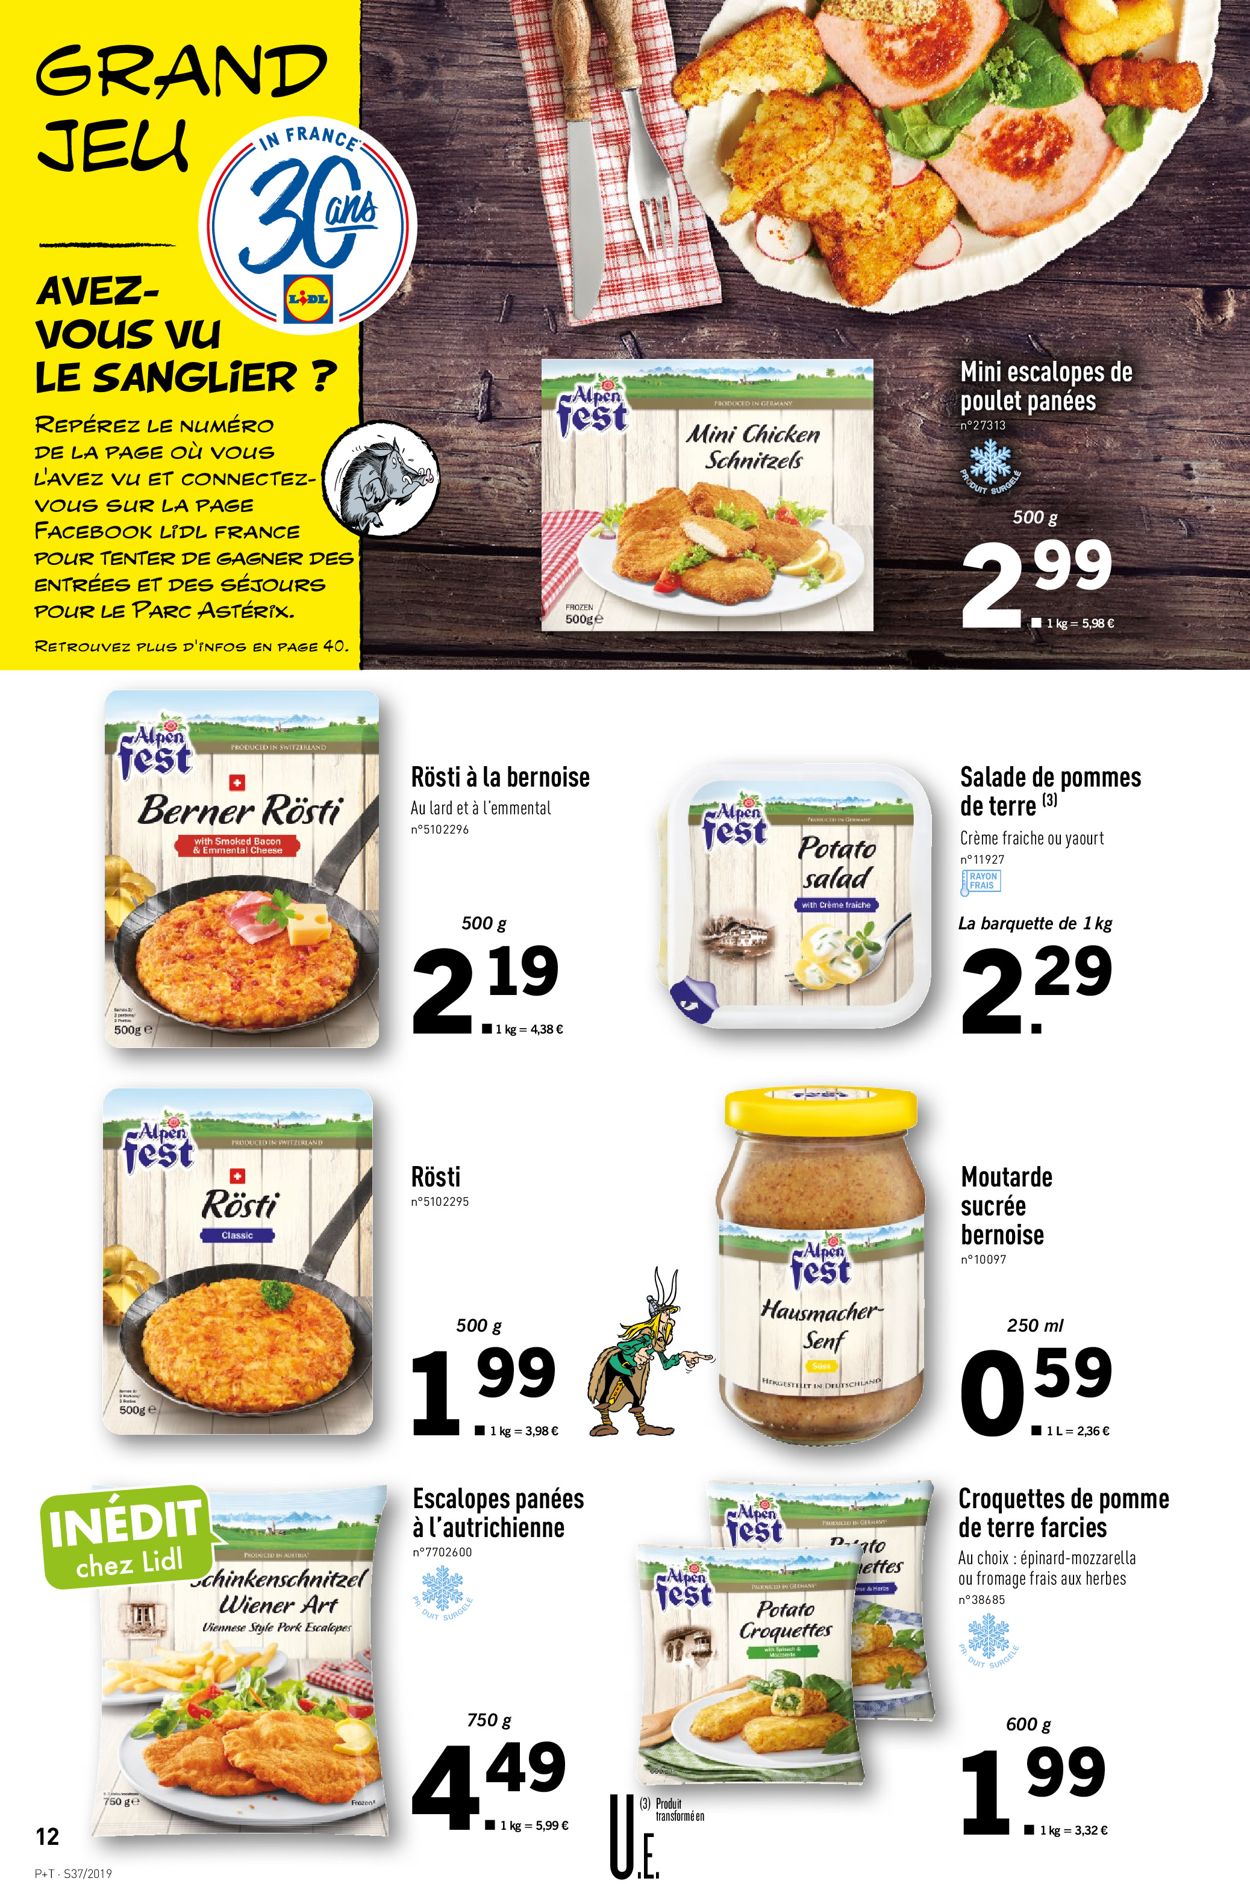 Lidl Catalogue - 11.09-17.09.2019 (Page 12)